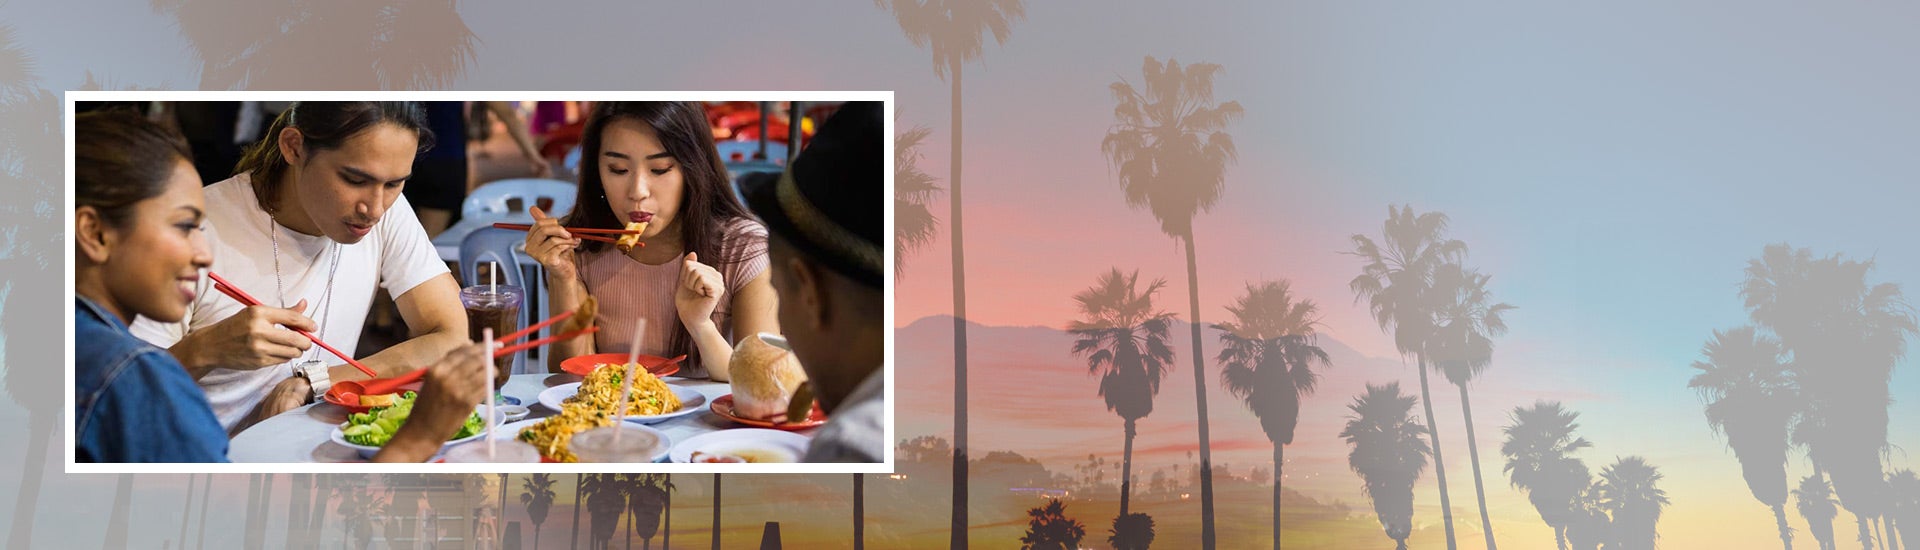 Collage of Riverside, palm trees, and students dining out.